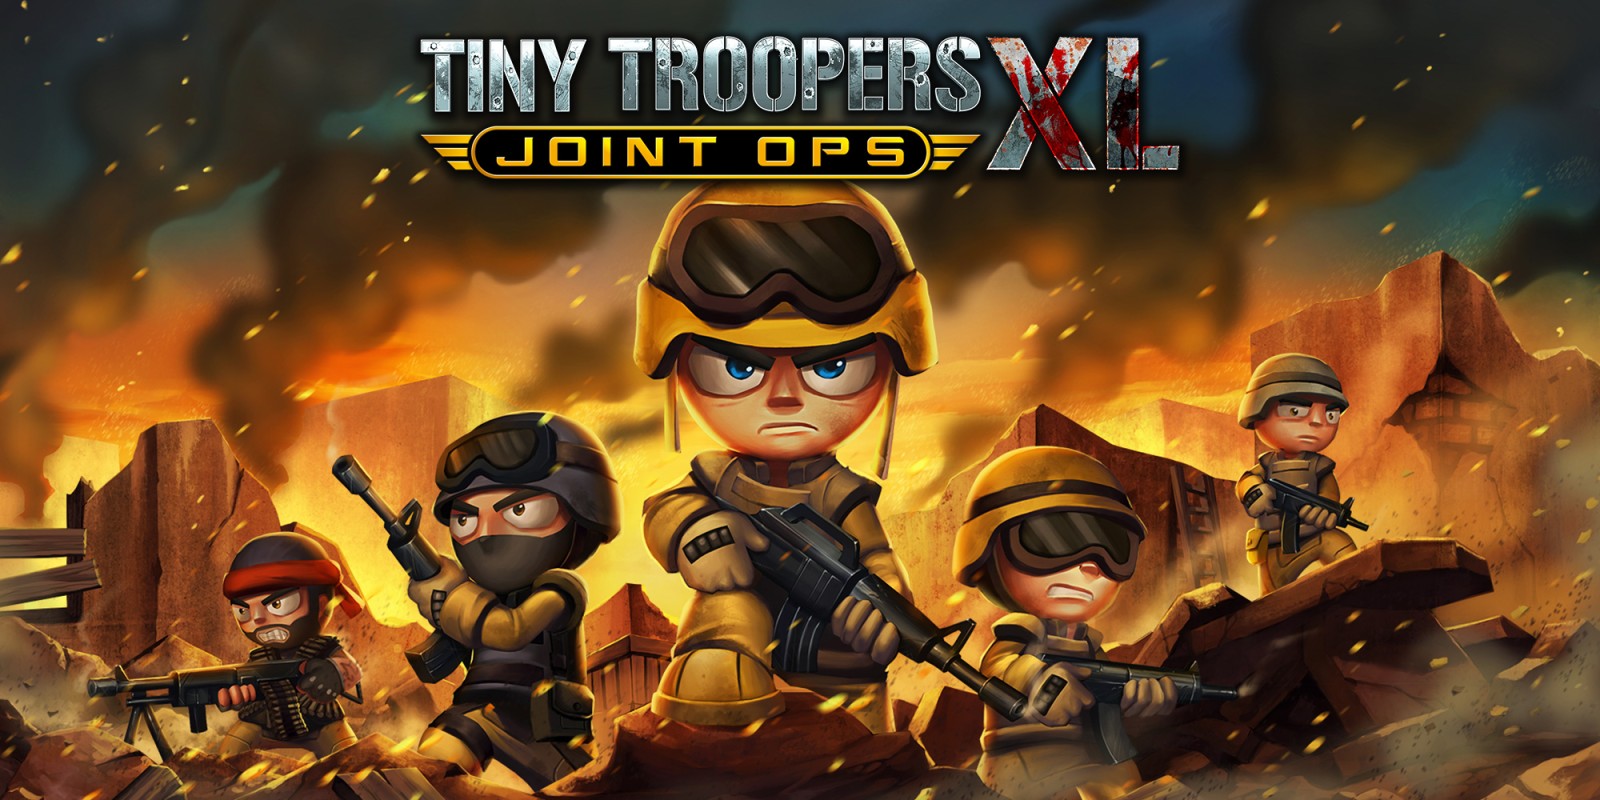 Tiny Troopers Joint Ops XL Review – Honey, I Shrunk The Troops!